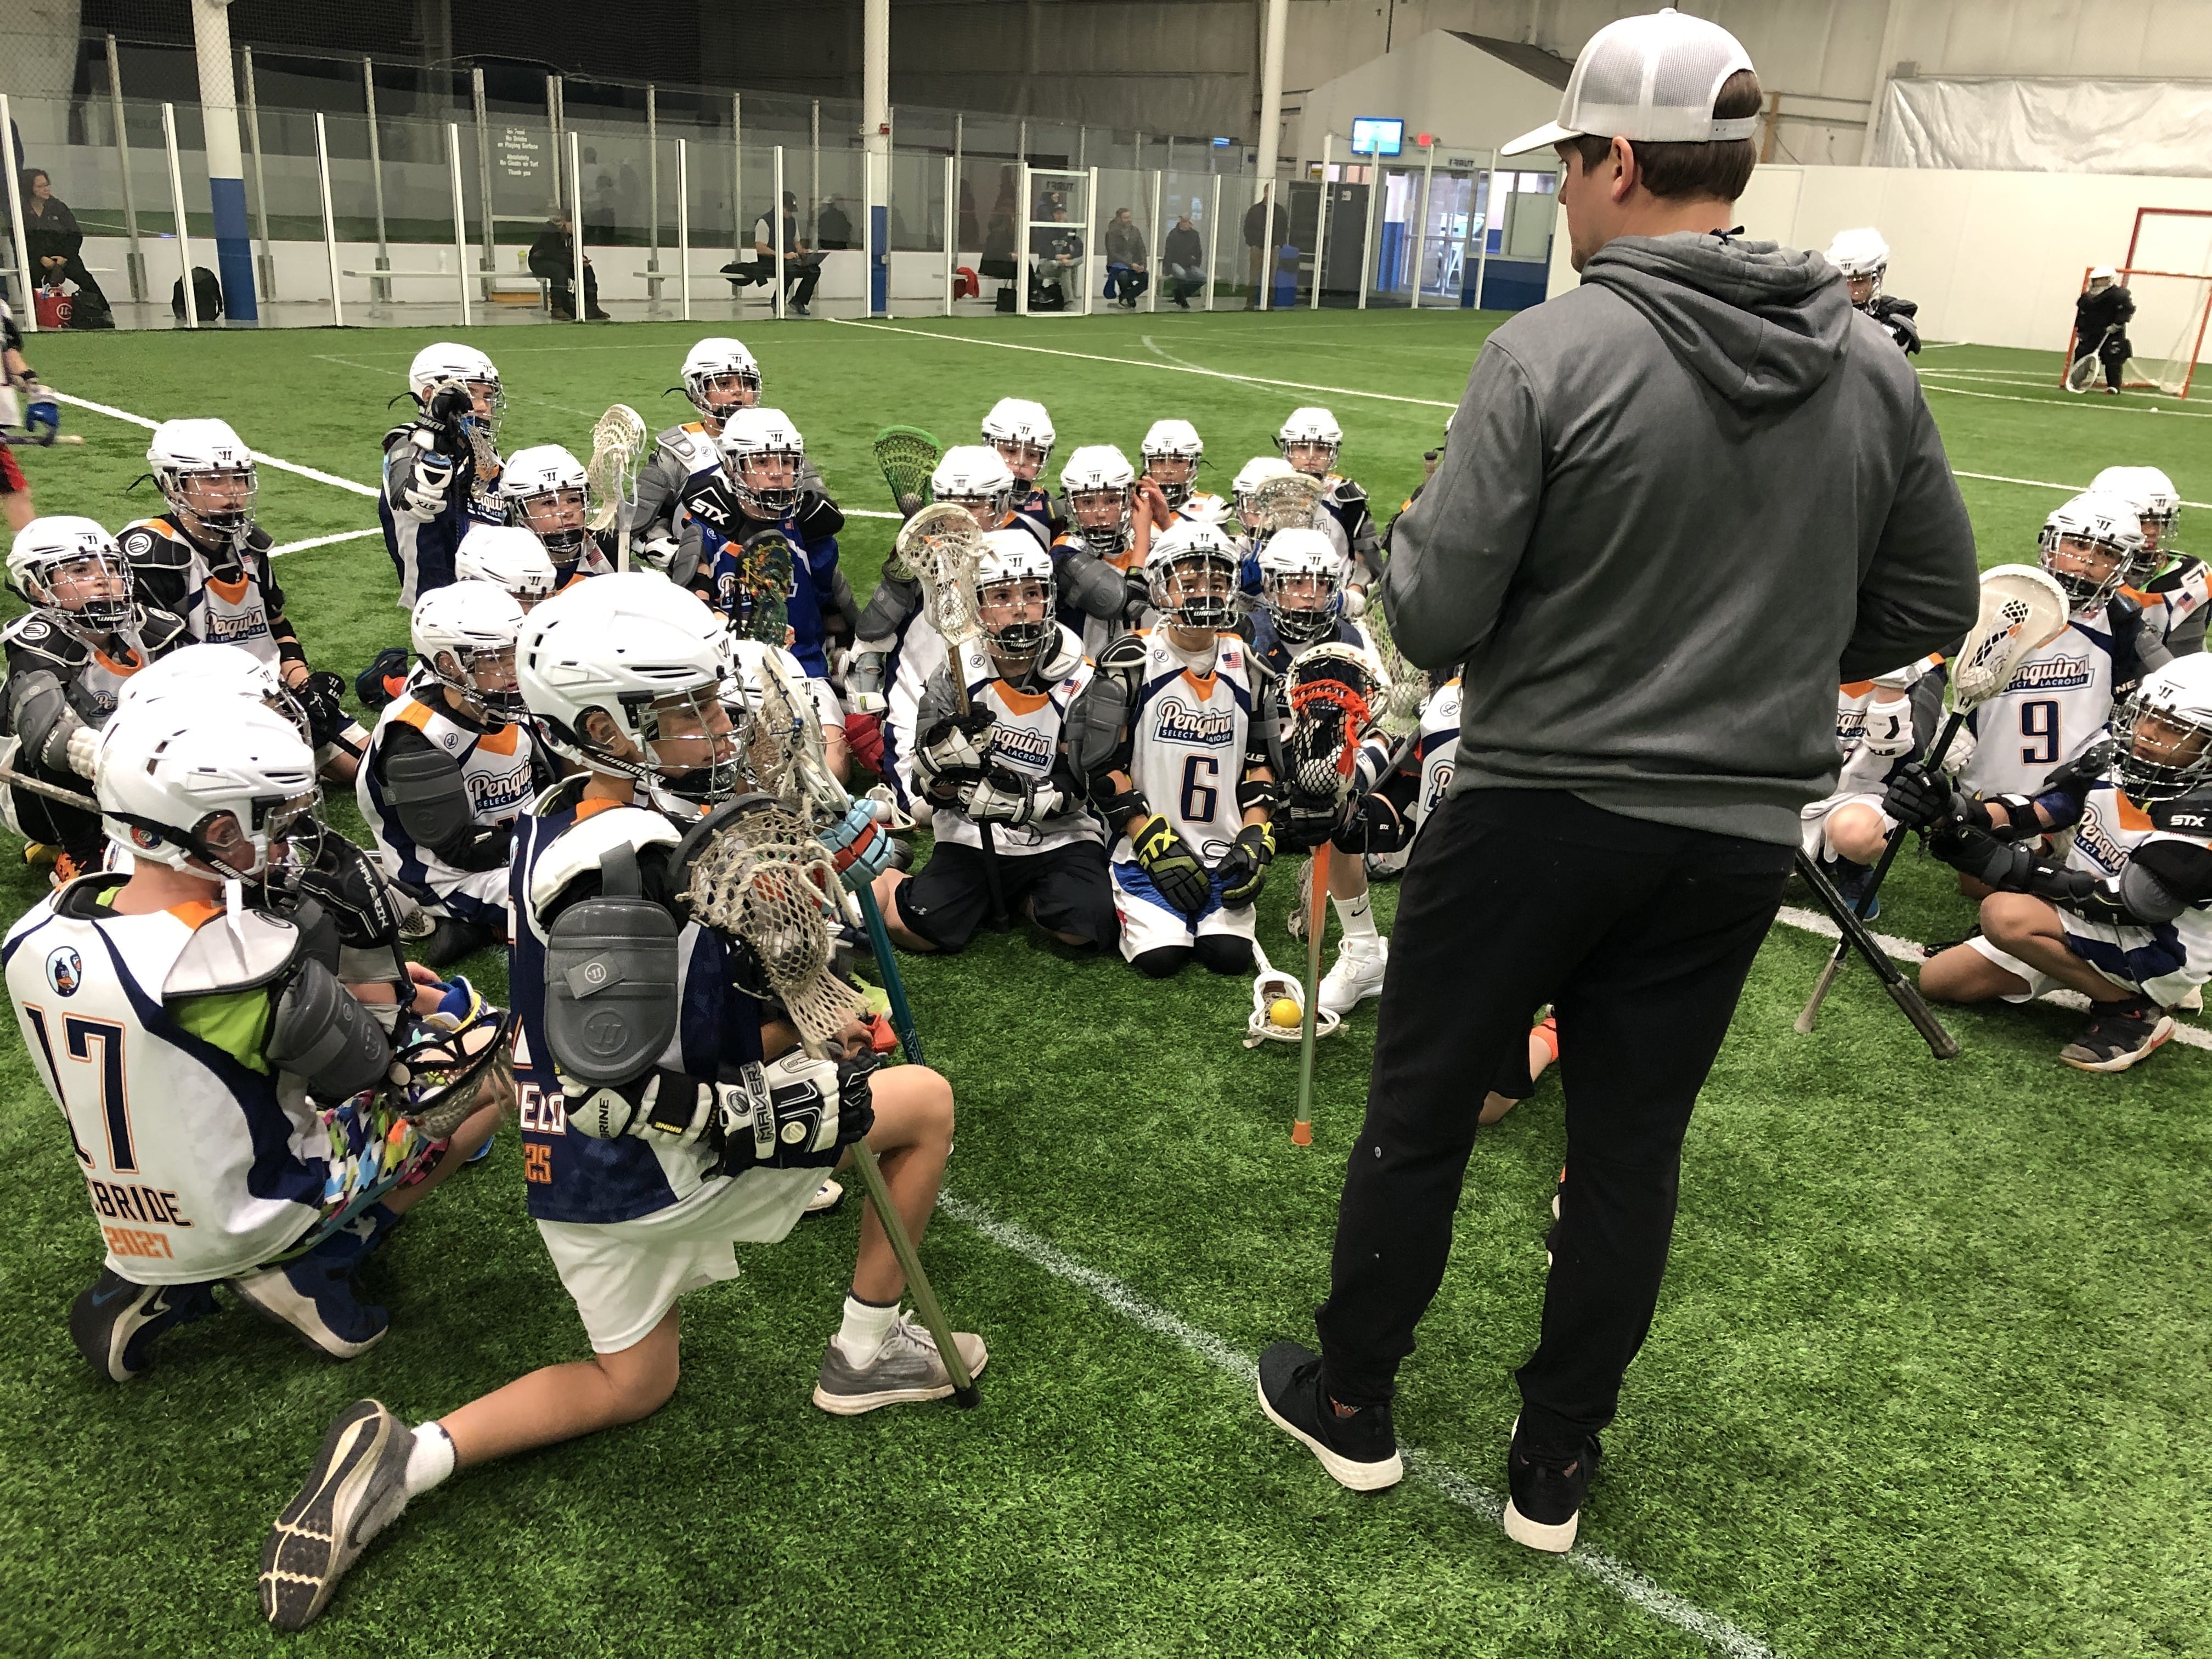 Bring Box Lacrosse to Town - How to Start a Team